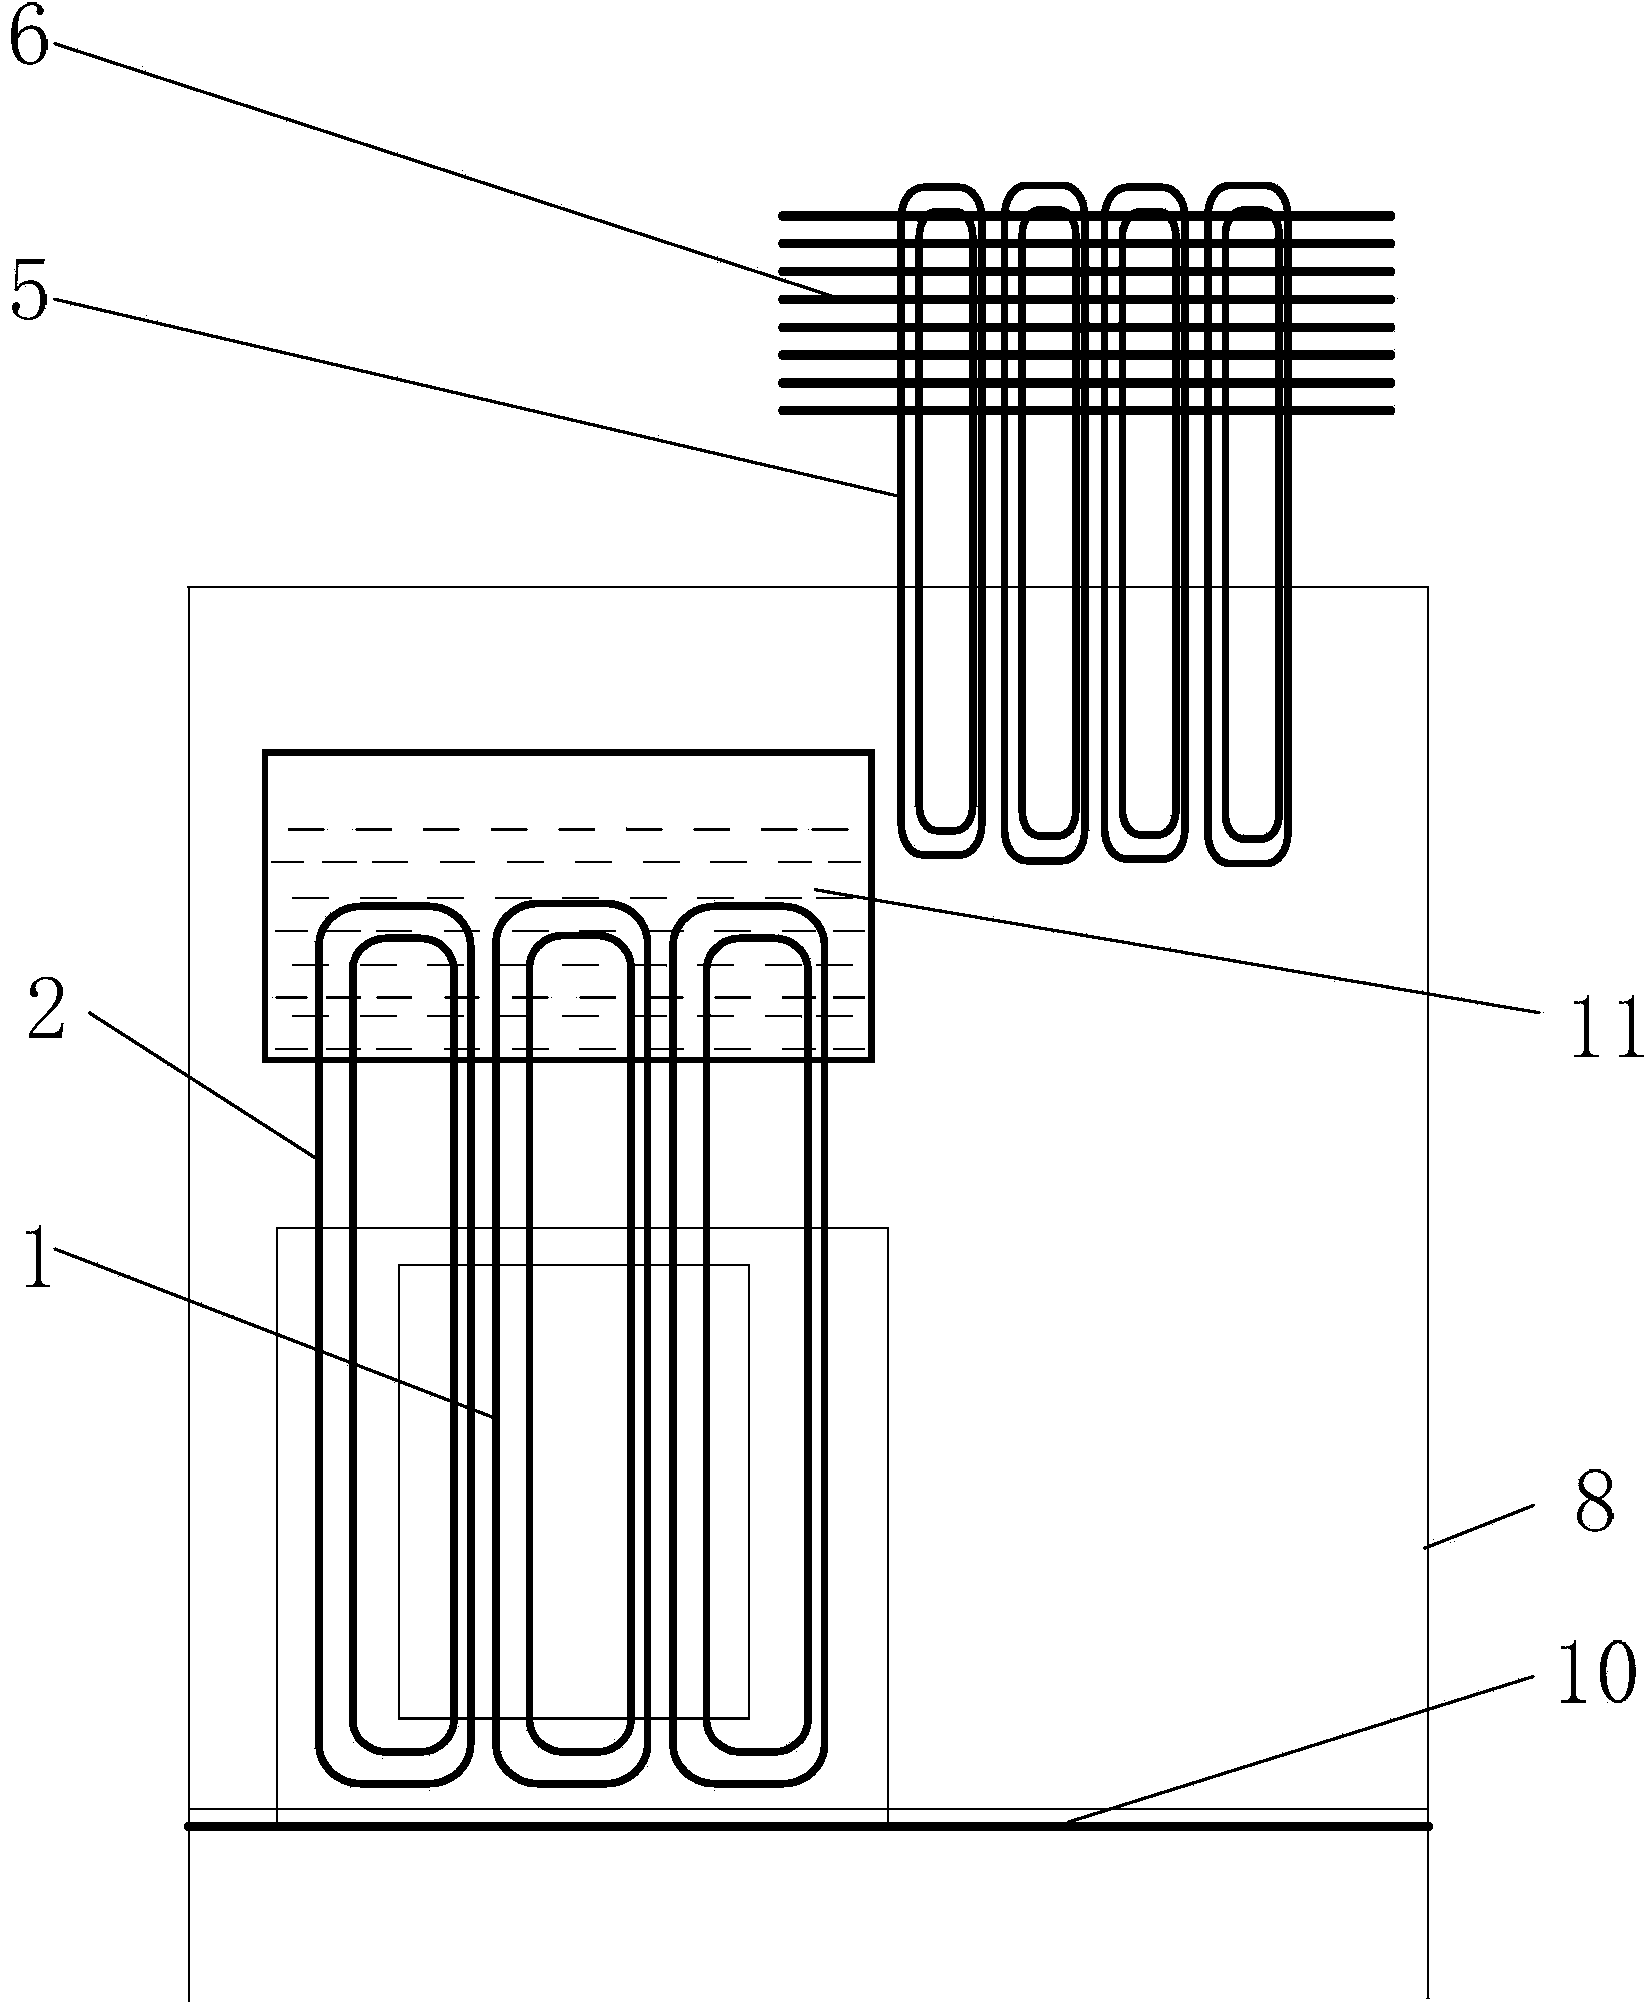 Heat tube cooling system and power equipment